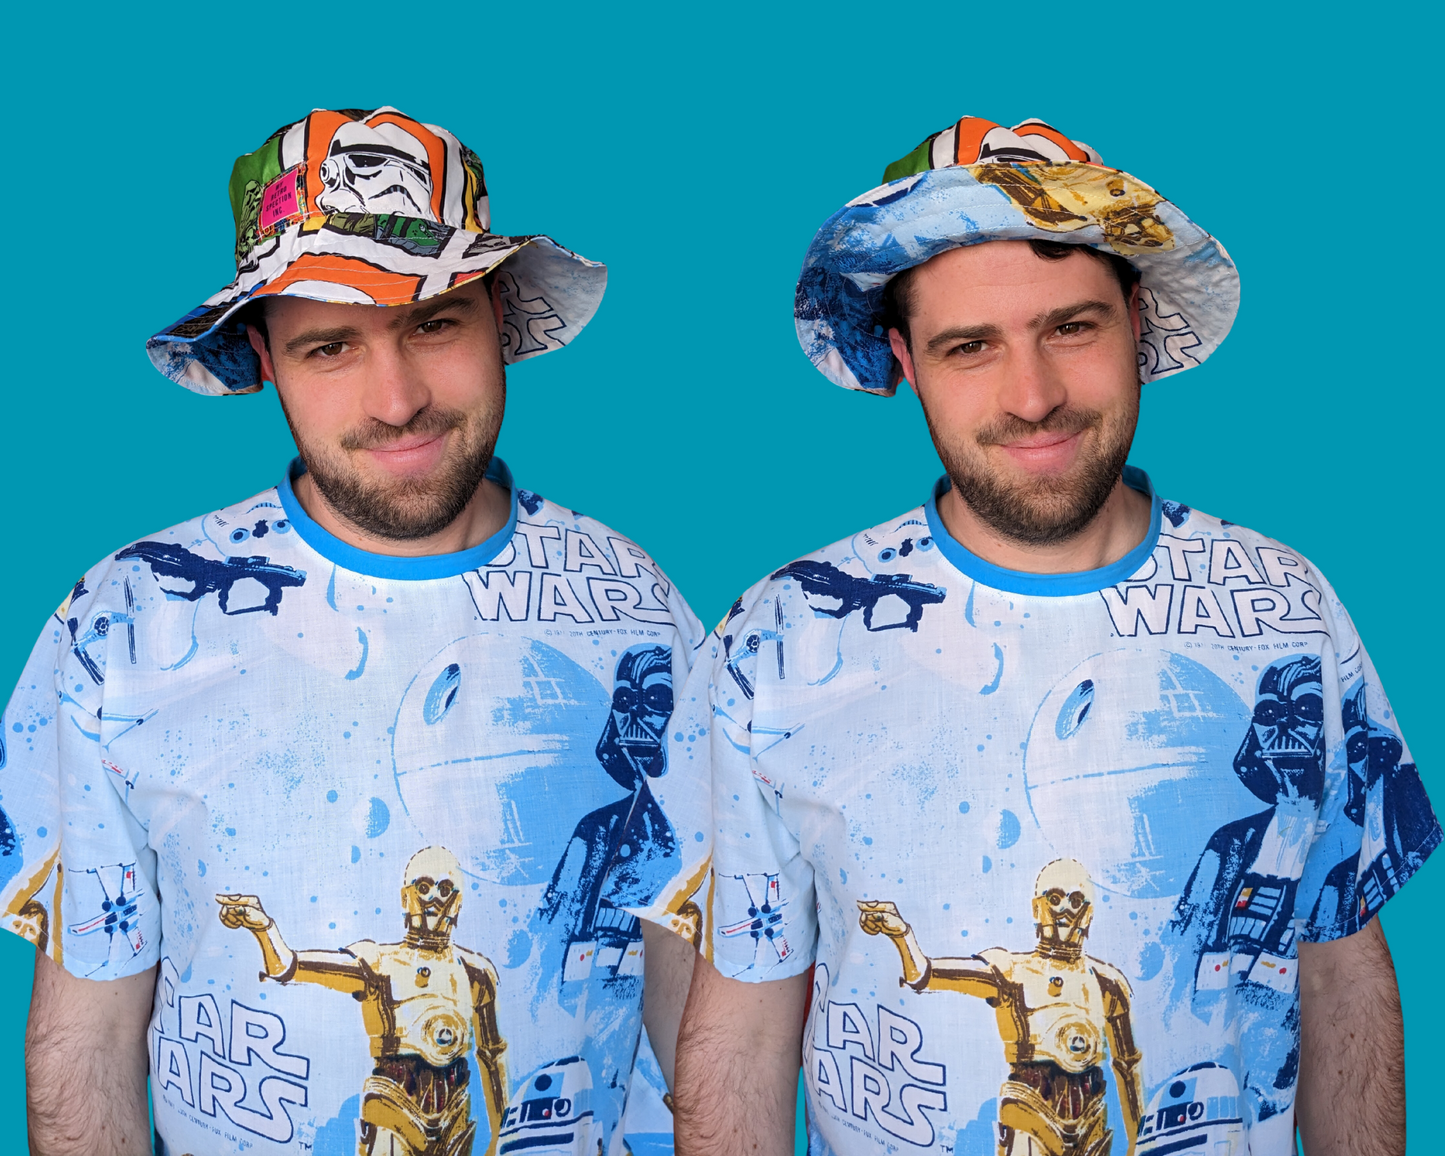 Star Wars Reversible Bucket Hats For Adults Made from Vintage, Upcycled Star Wars Bedsheets